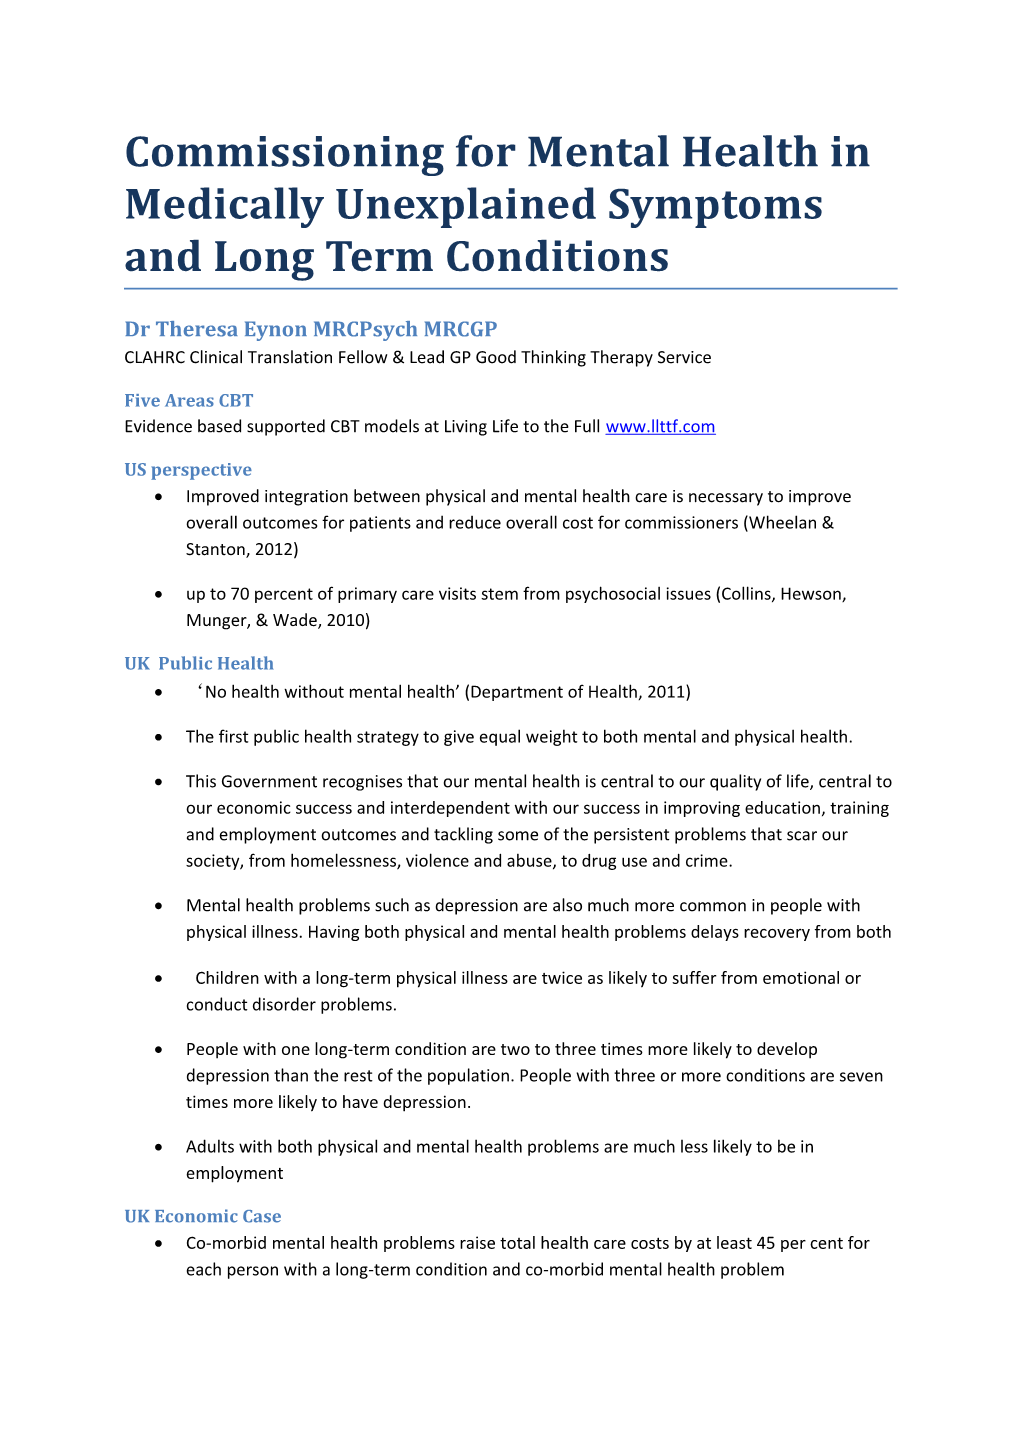 Commissioning for Mental Health in Medically Unexplained Symptoms and Long Term Conditions